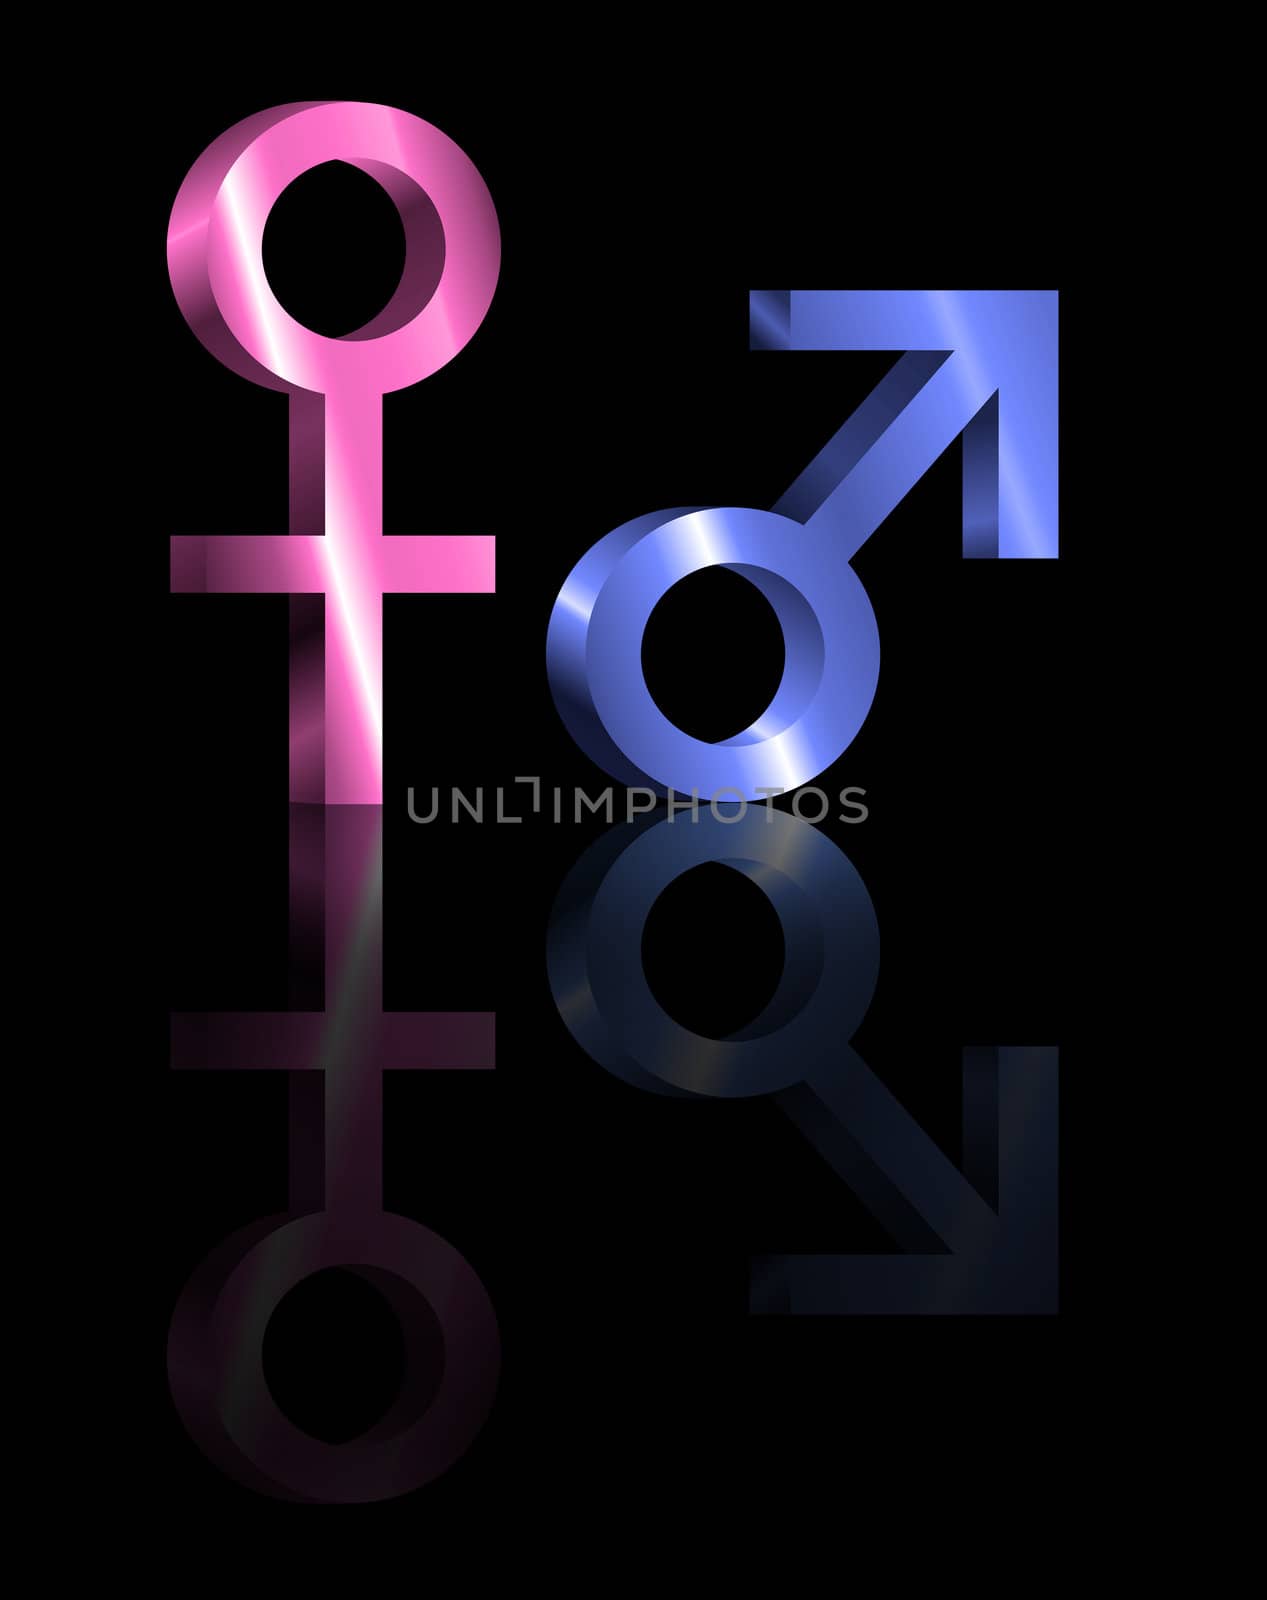 Illustration depicting metallic blue and pink male and female symbols arranged over black and reflecting into the foreground.